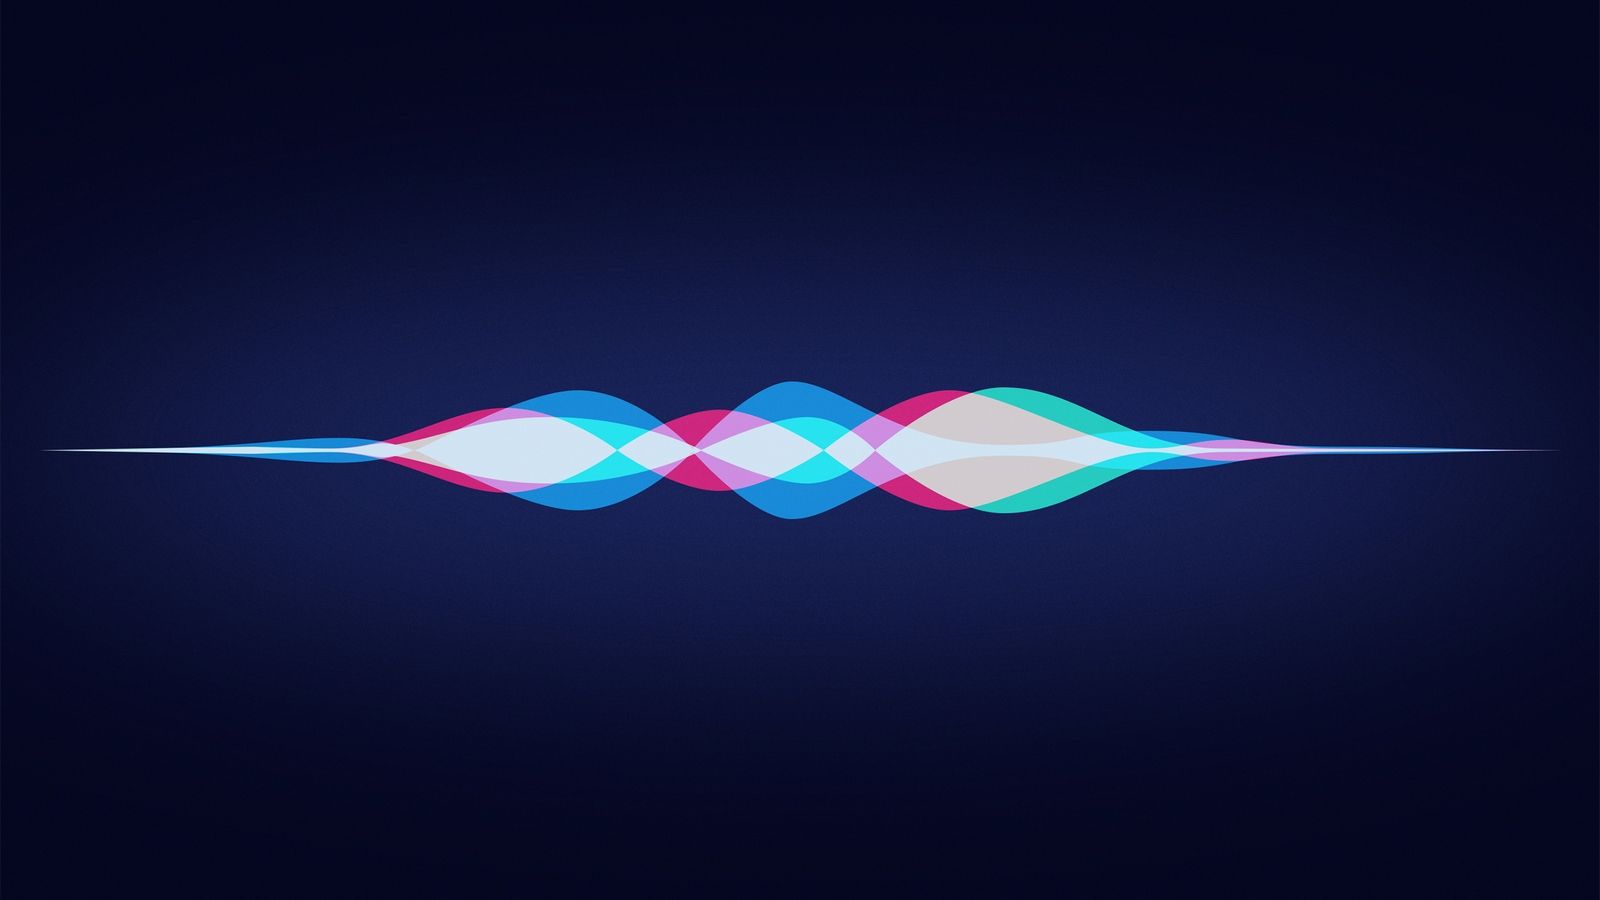 SiriOS could be Apple’s new IoT operating system